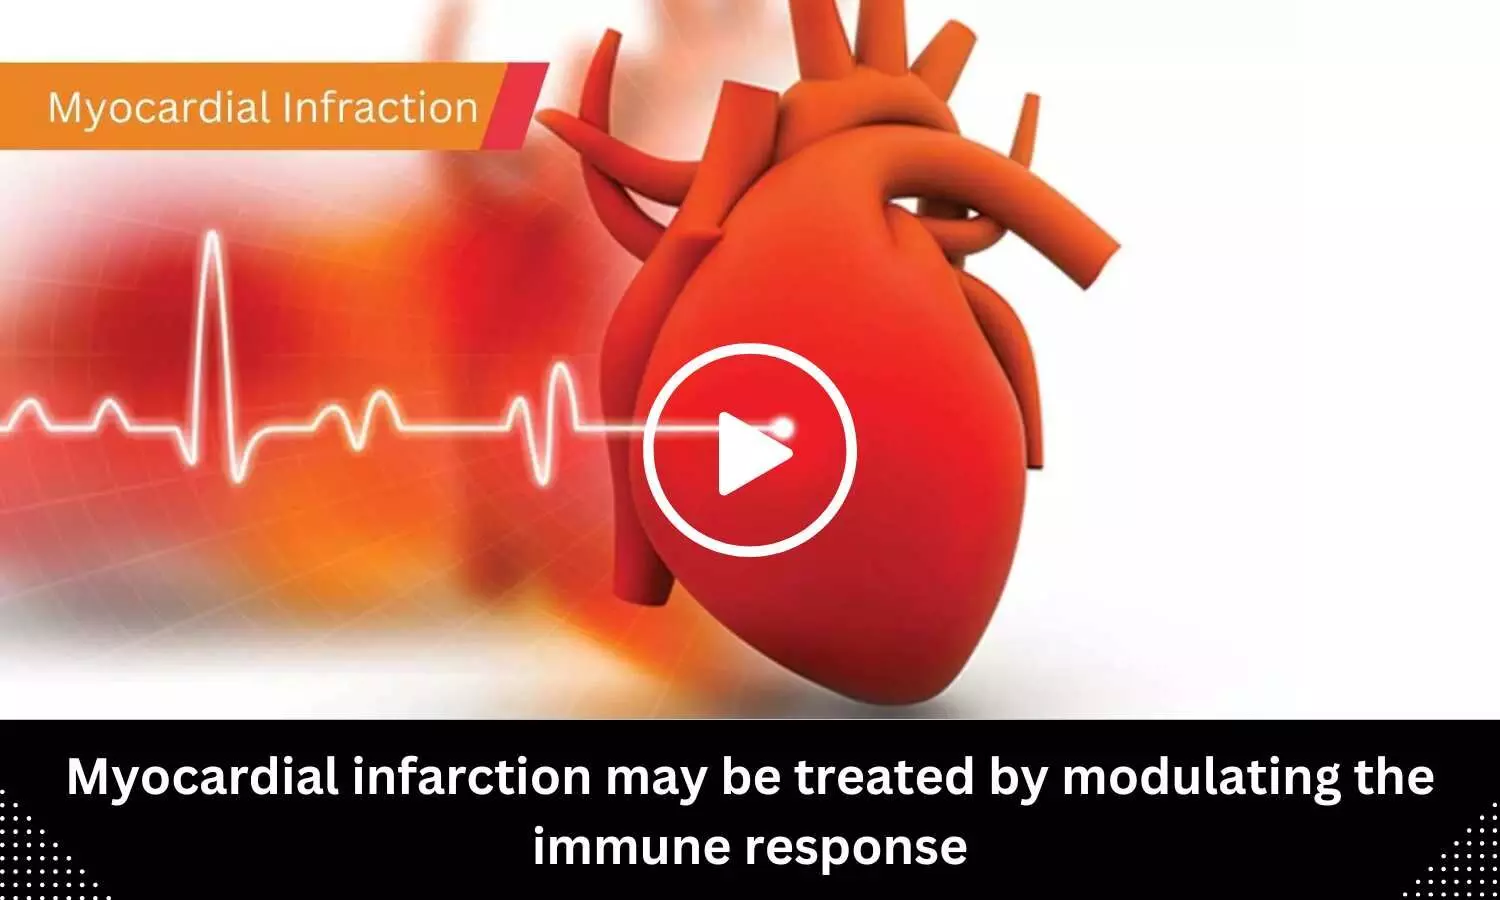 Myocardial infarction may be treated by modulating the immune response